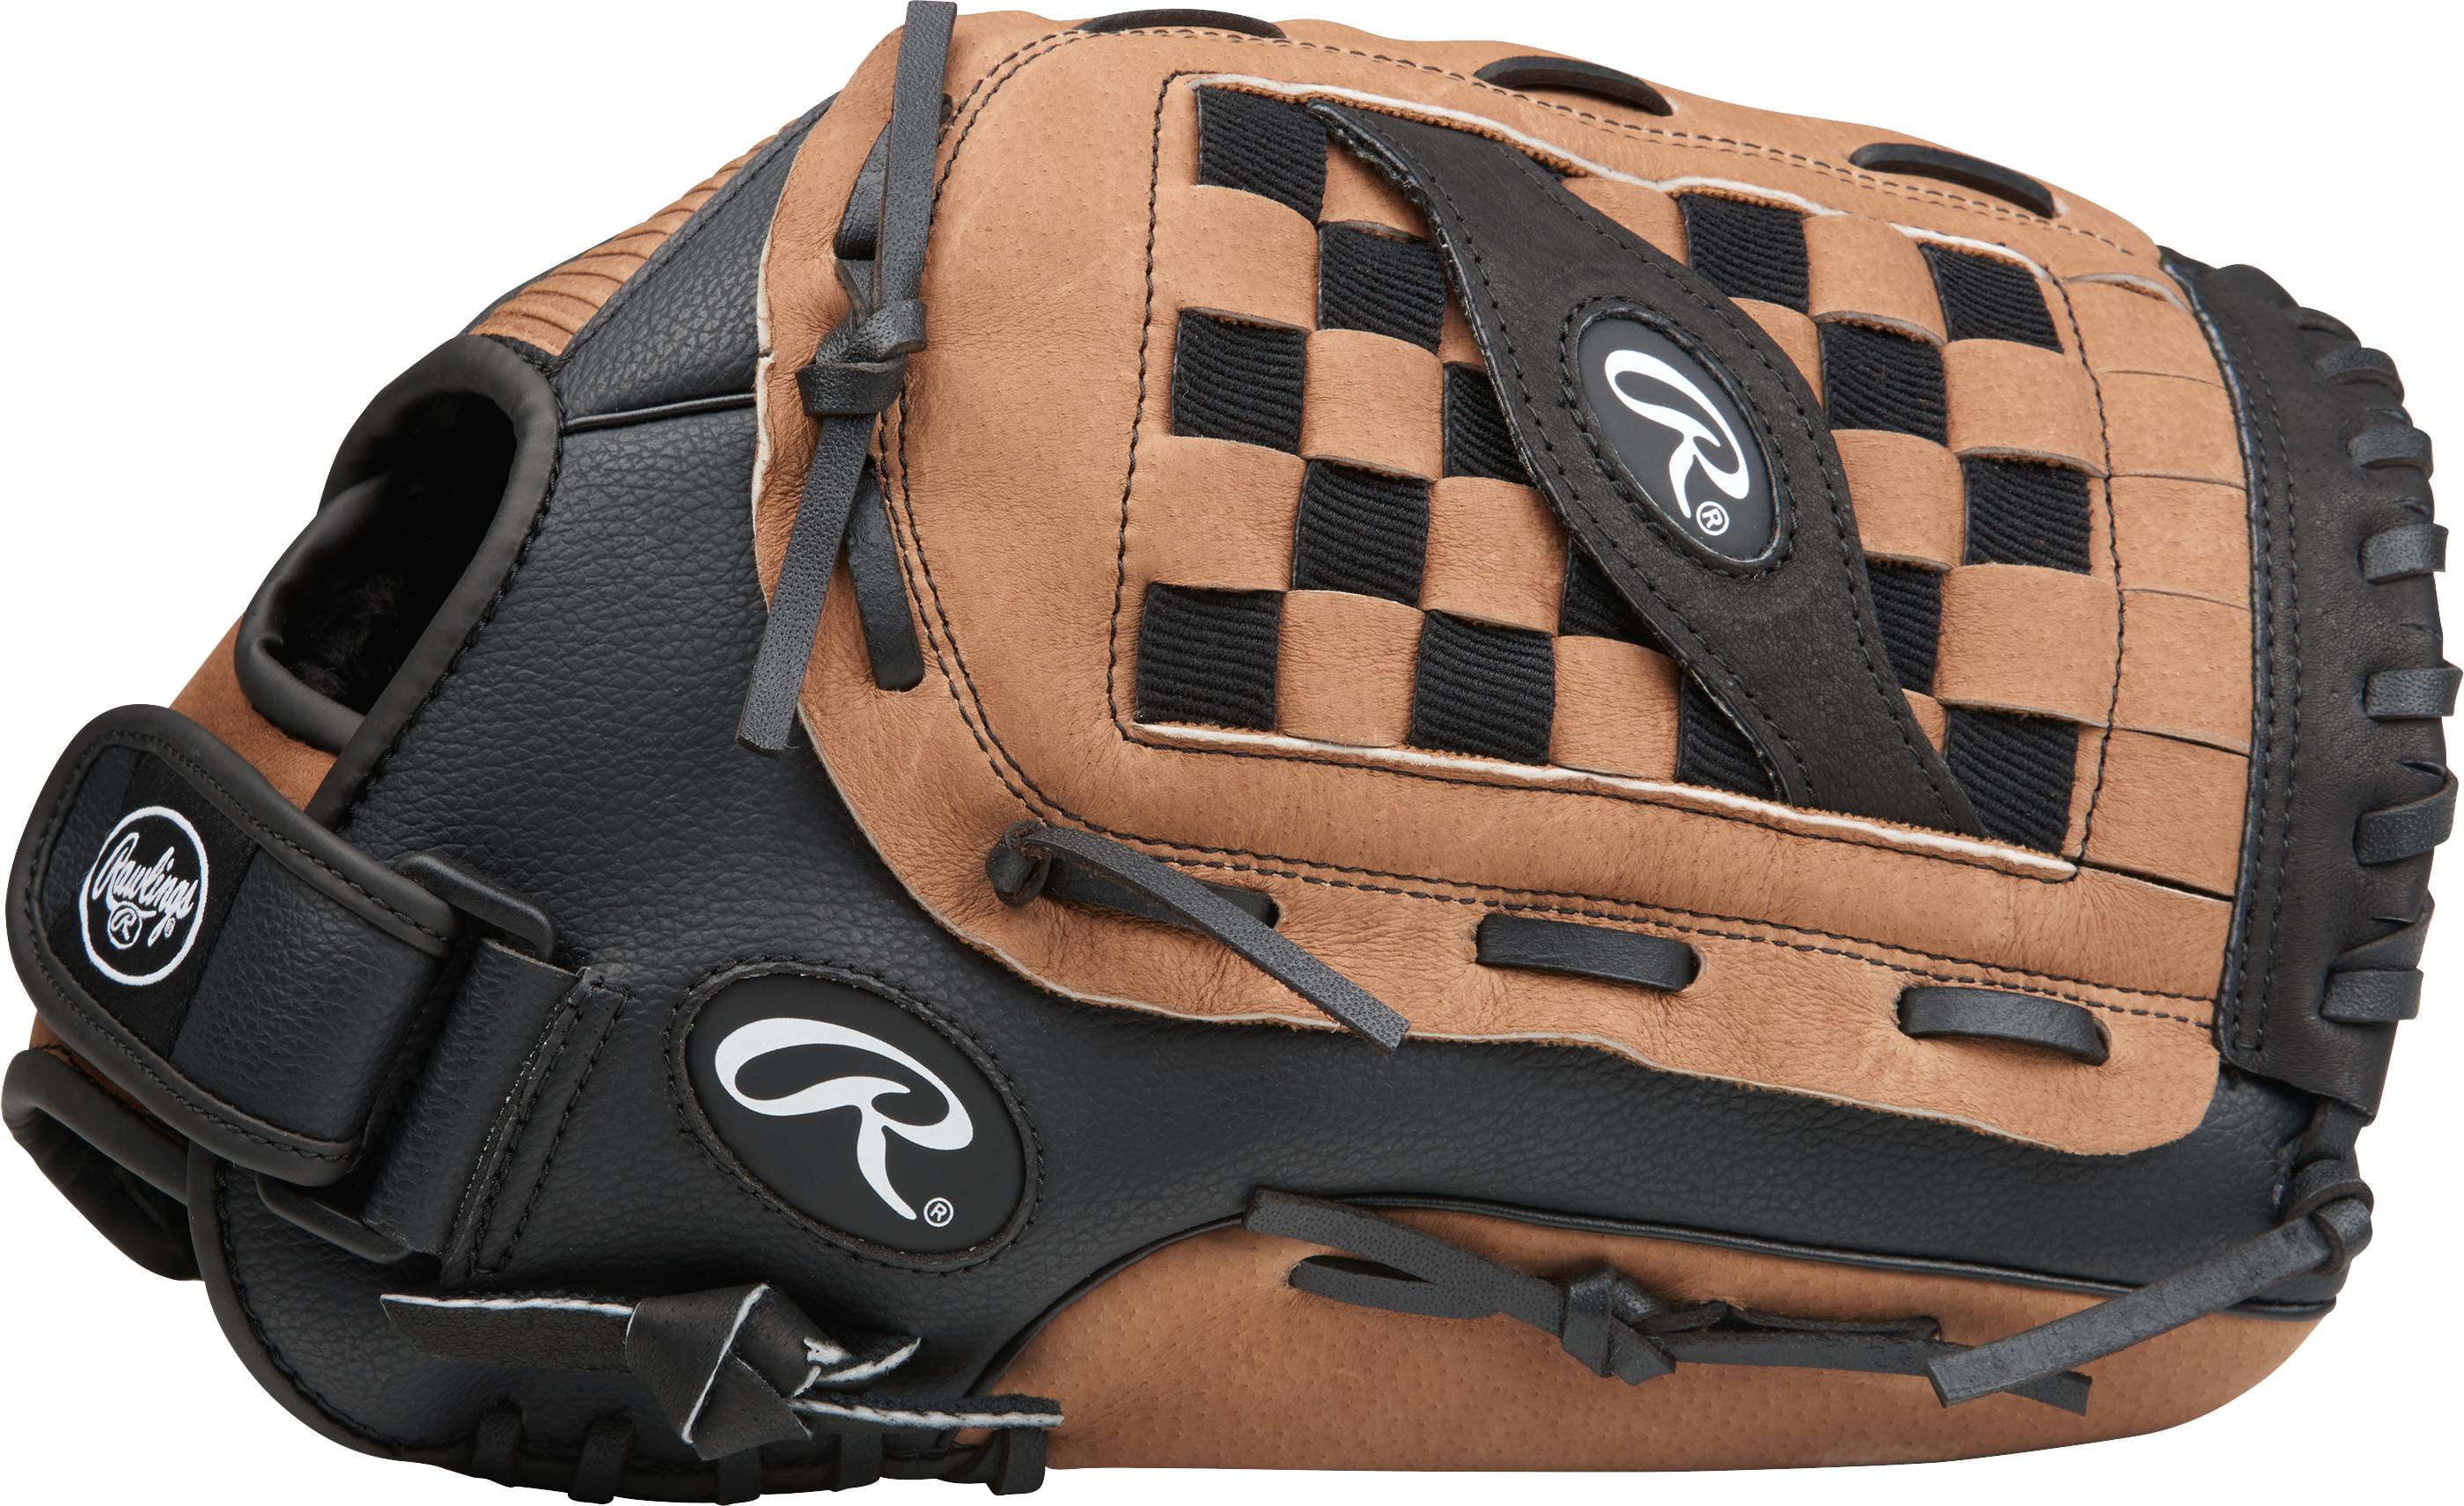 Gloveworks, Page 3, Slowpitch Softball Forums